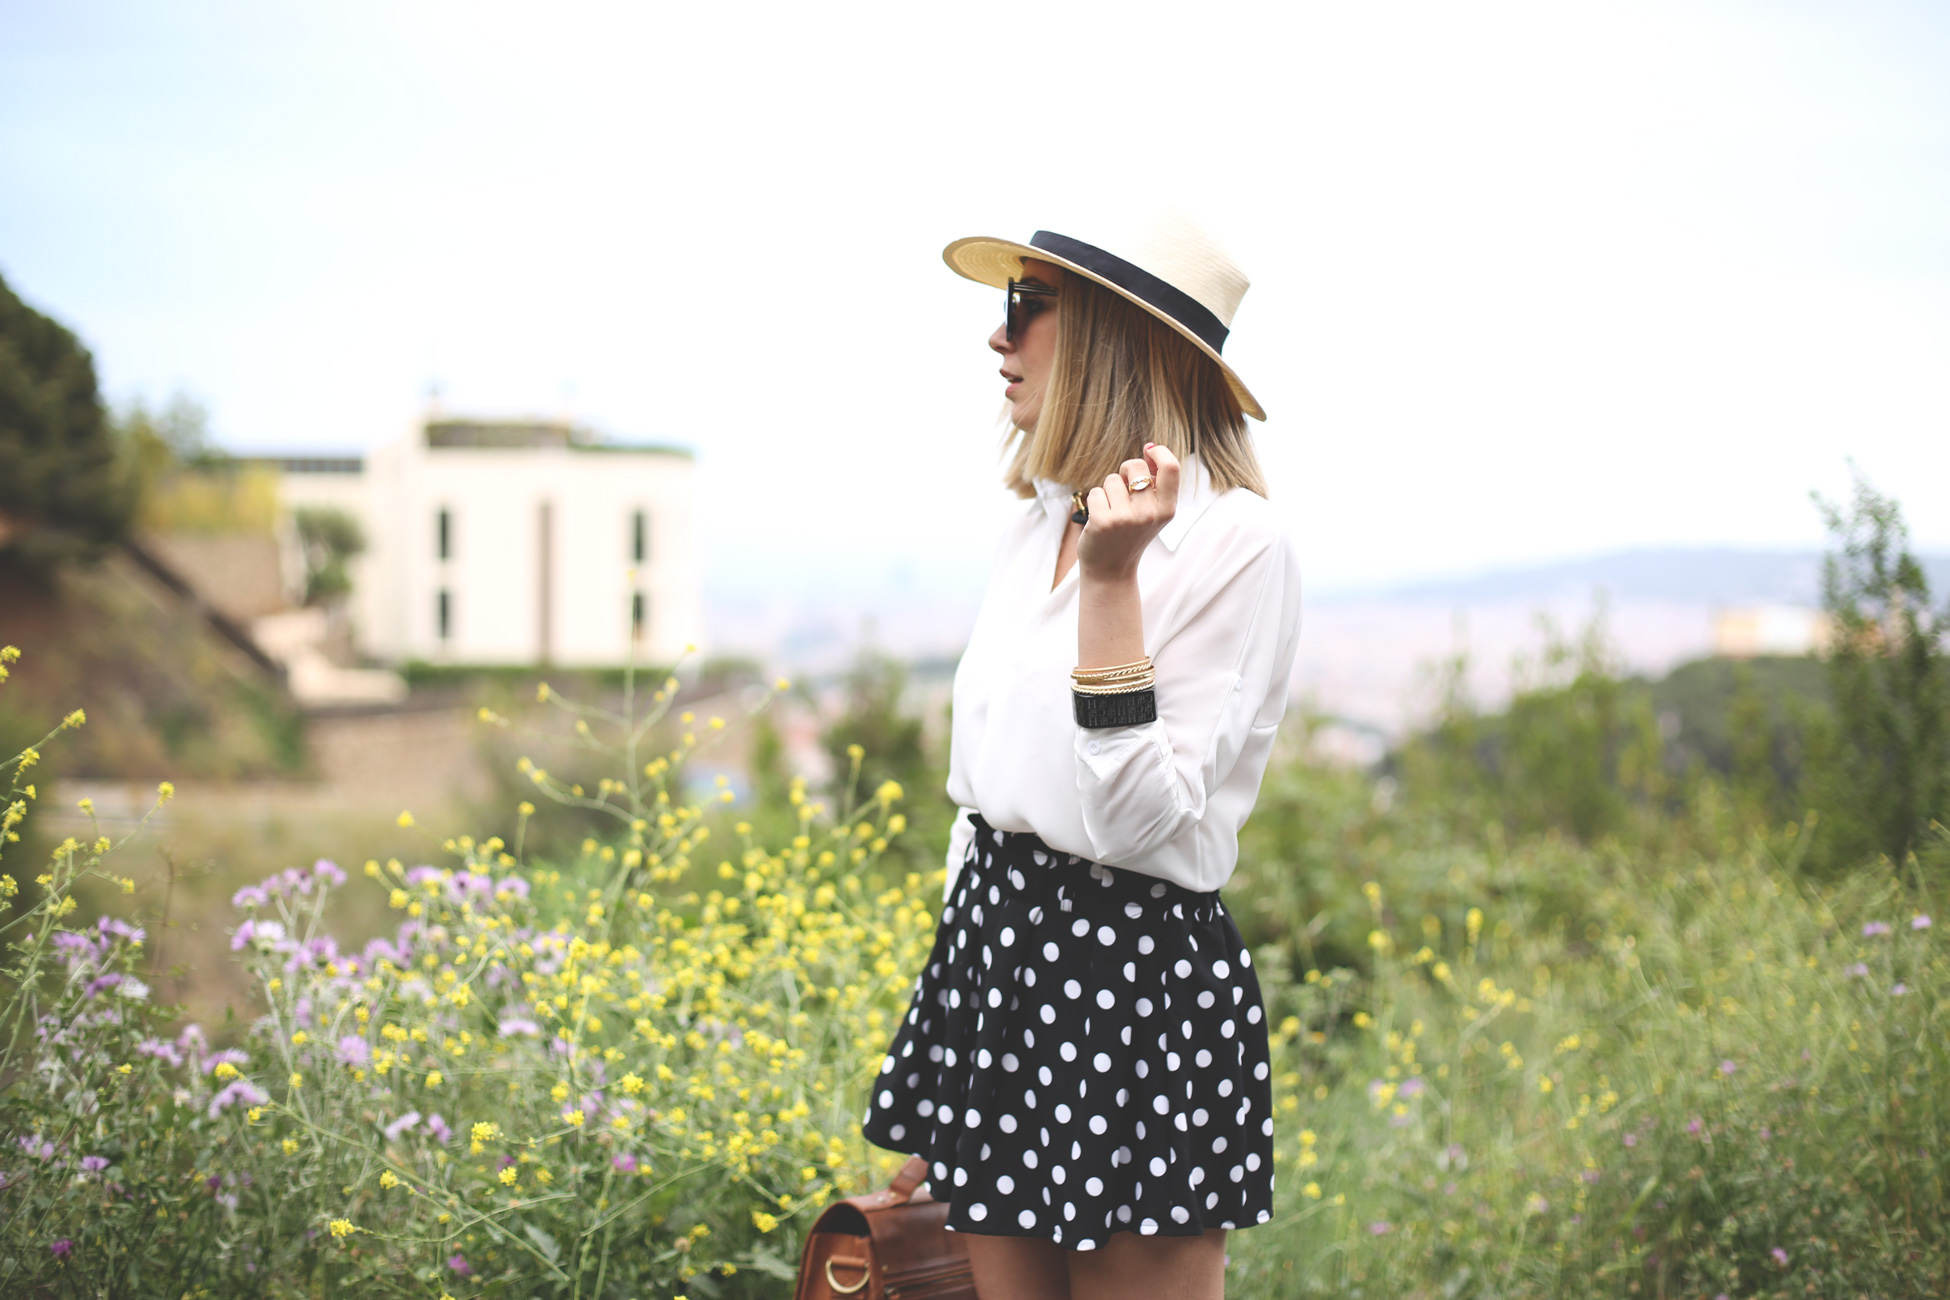 spring look, polka dots, panama, fedora, blouse, oh my bag, leather bag, black and white